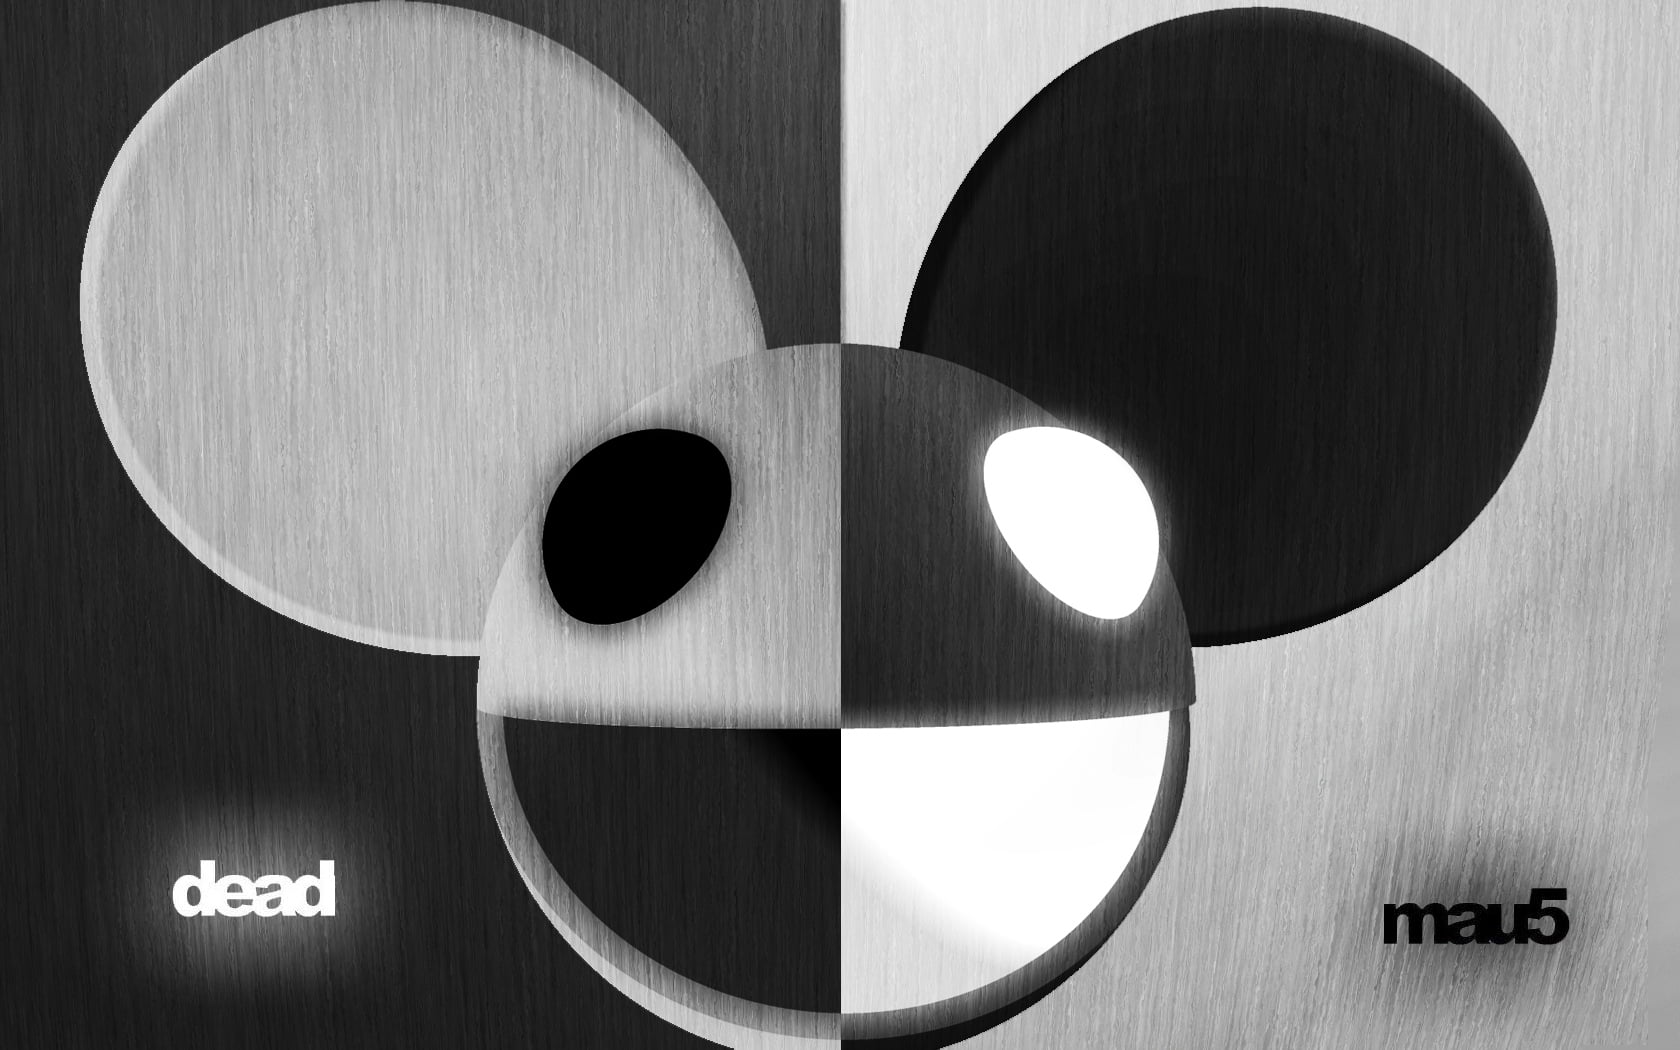 gray and black Mickey mouse digital wallpaper, deadmau5, background